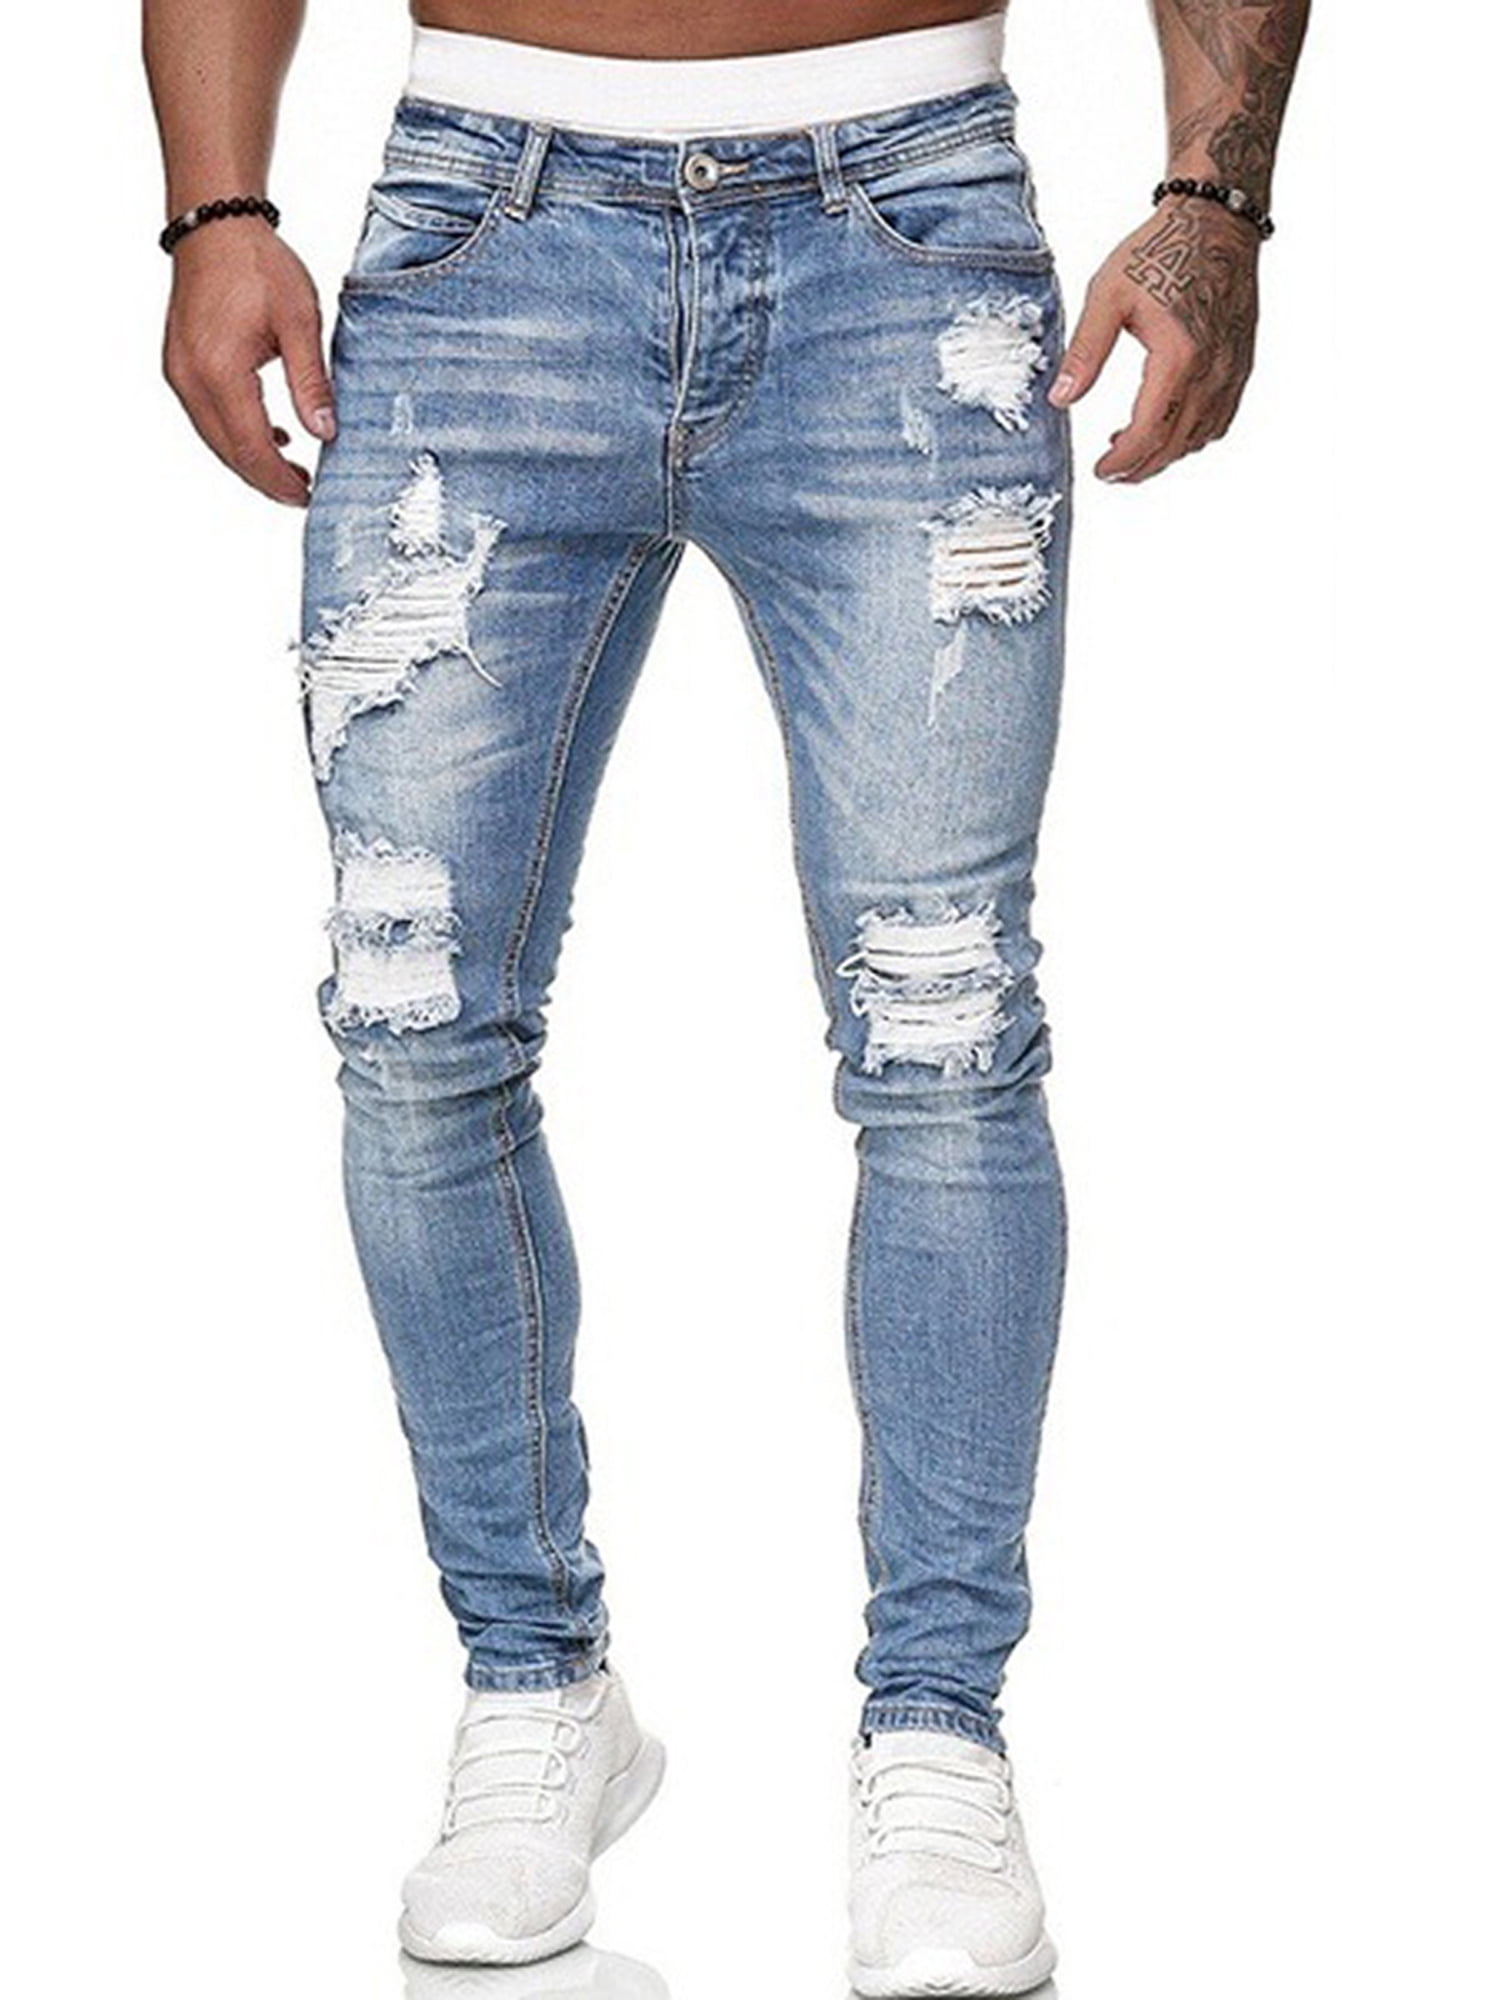 CenturyX Skinny Distressed Ripped Jeans Destroyed Stretchy Knee Holes Slim Tapered Leg Jeans Light Blue L - Walmart.com